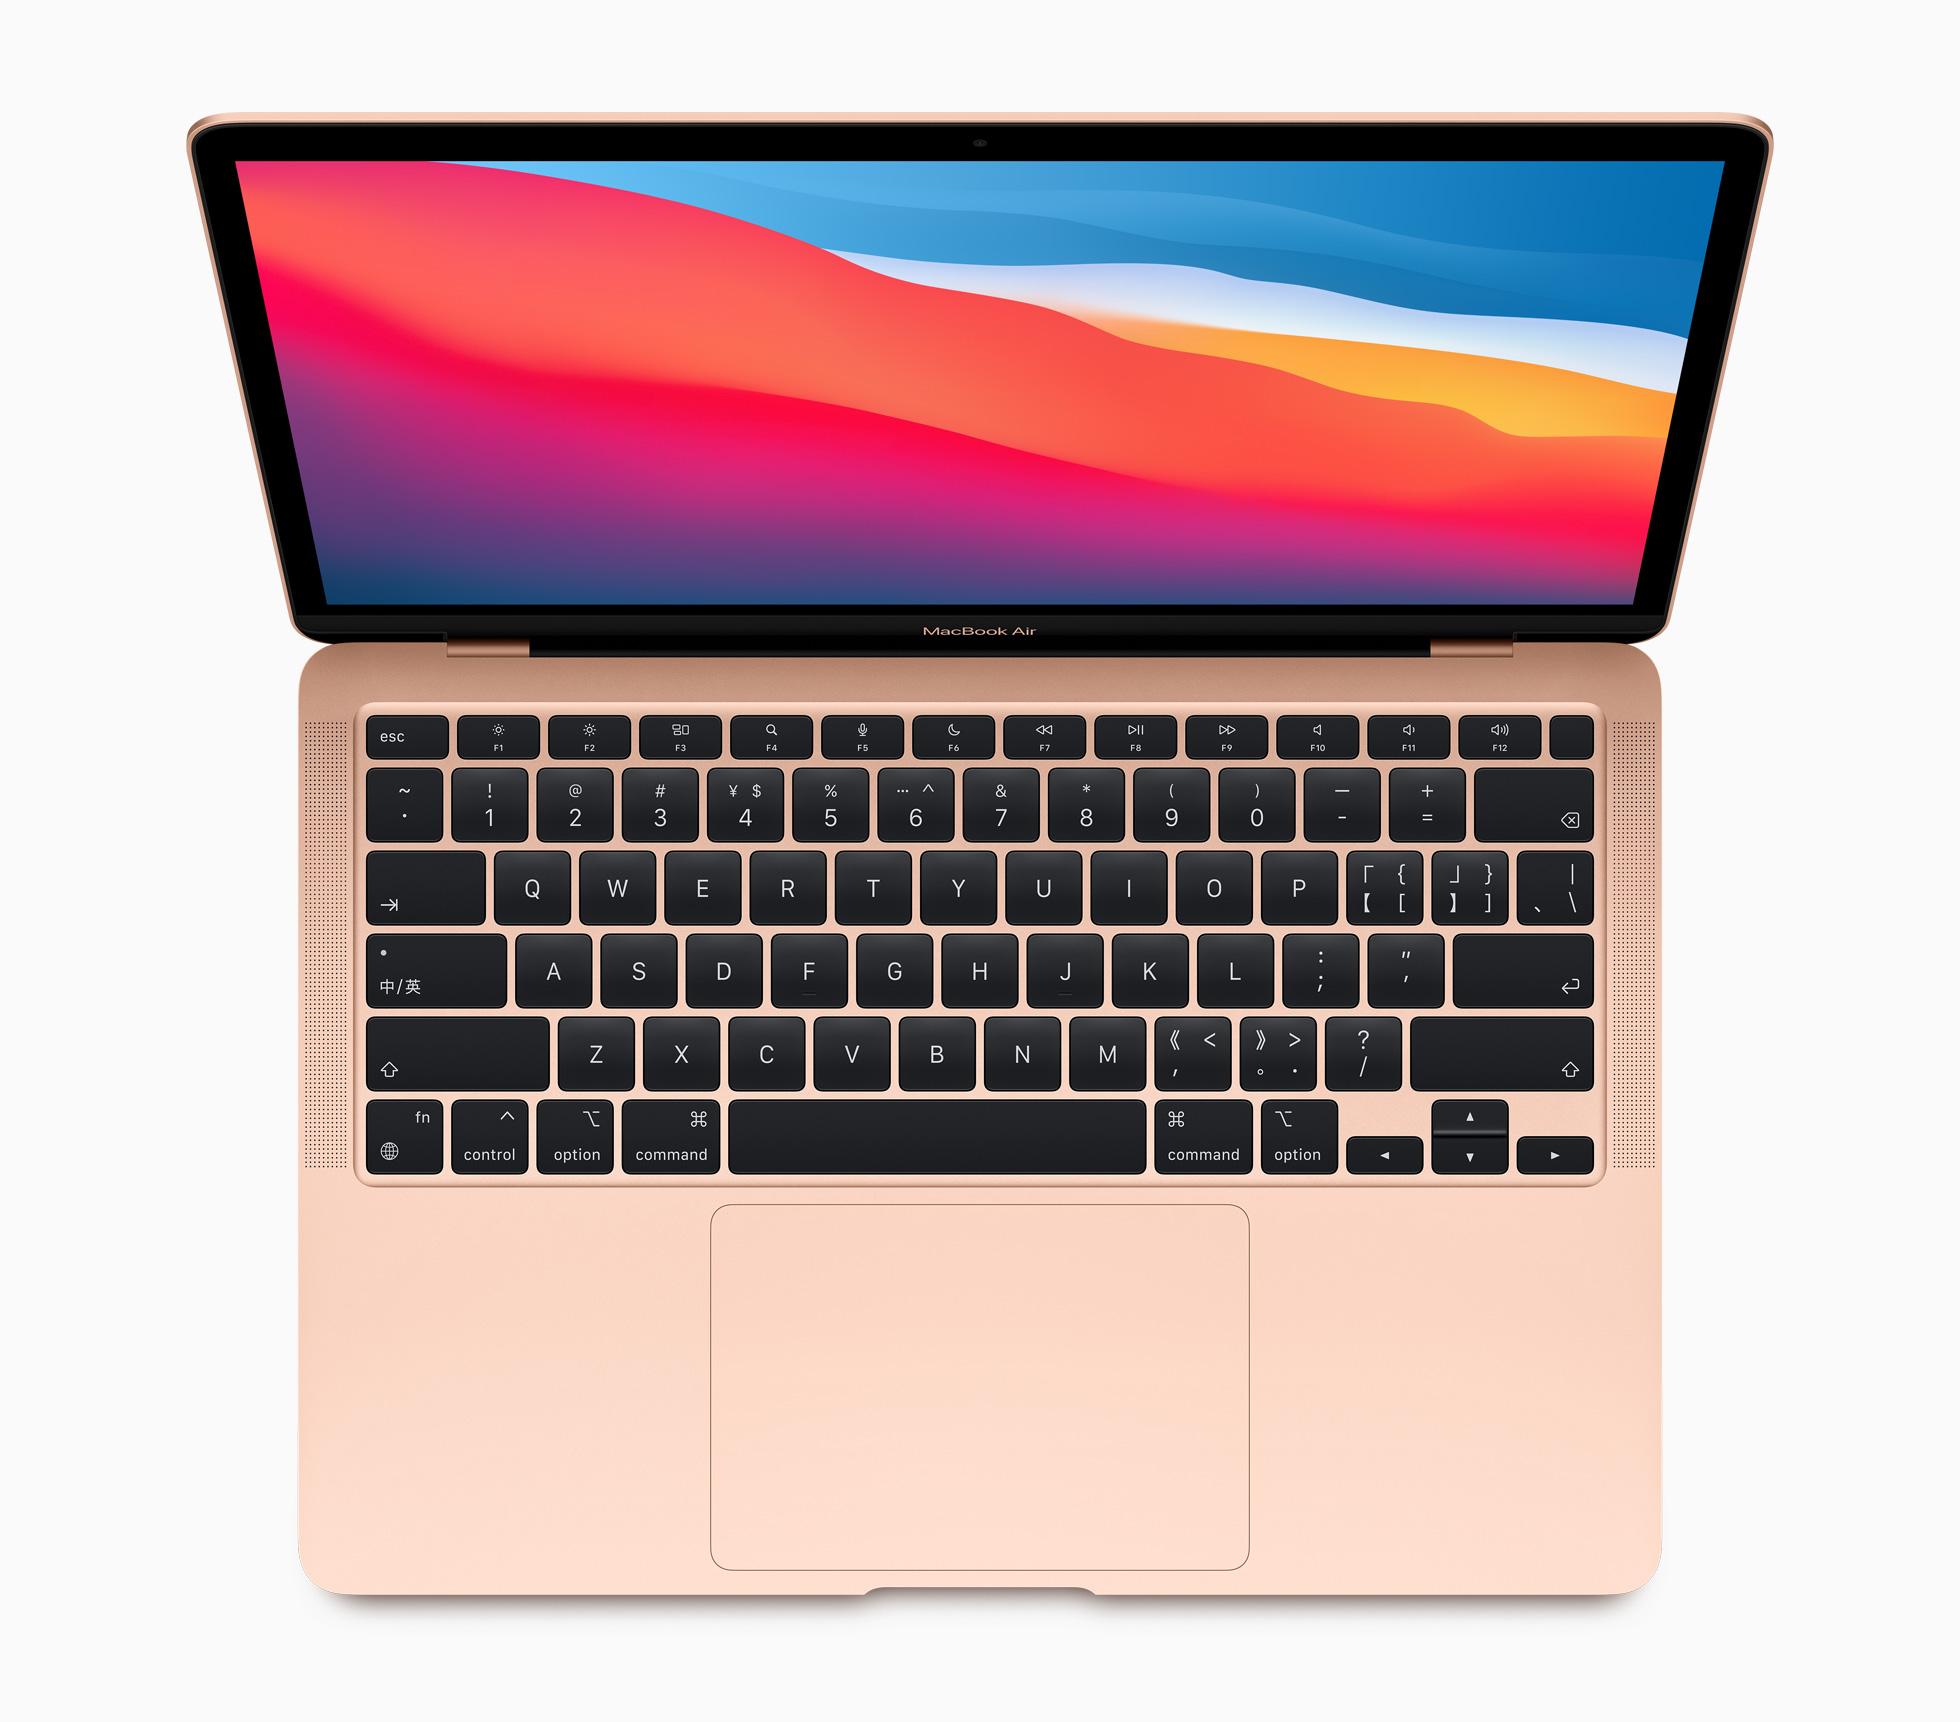 Apple announces new MacBook Air with M1 chip starting at $999 | iMore